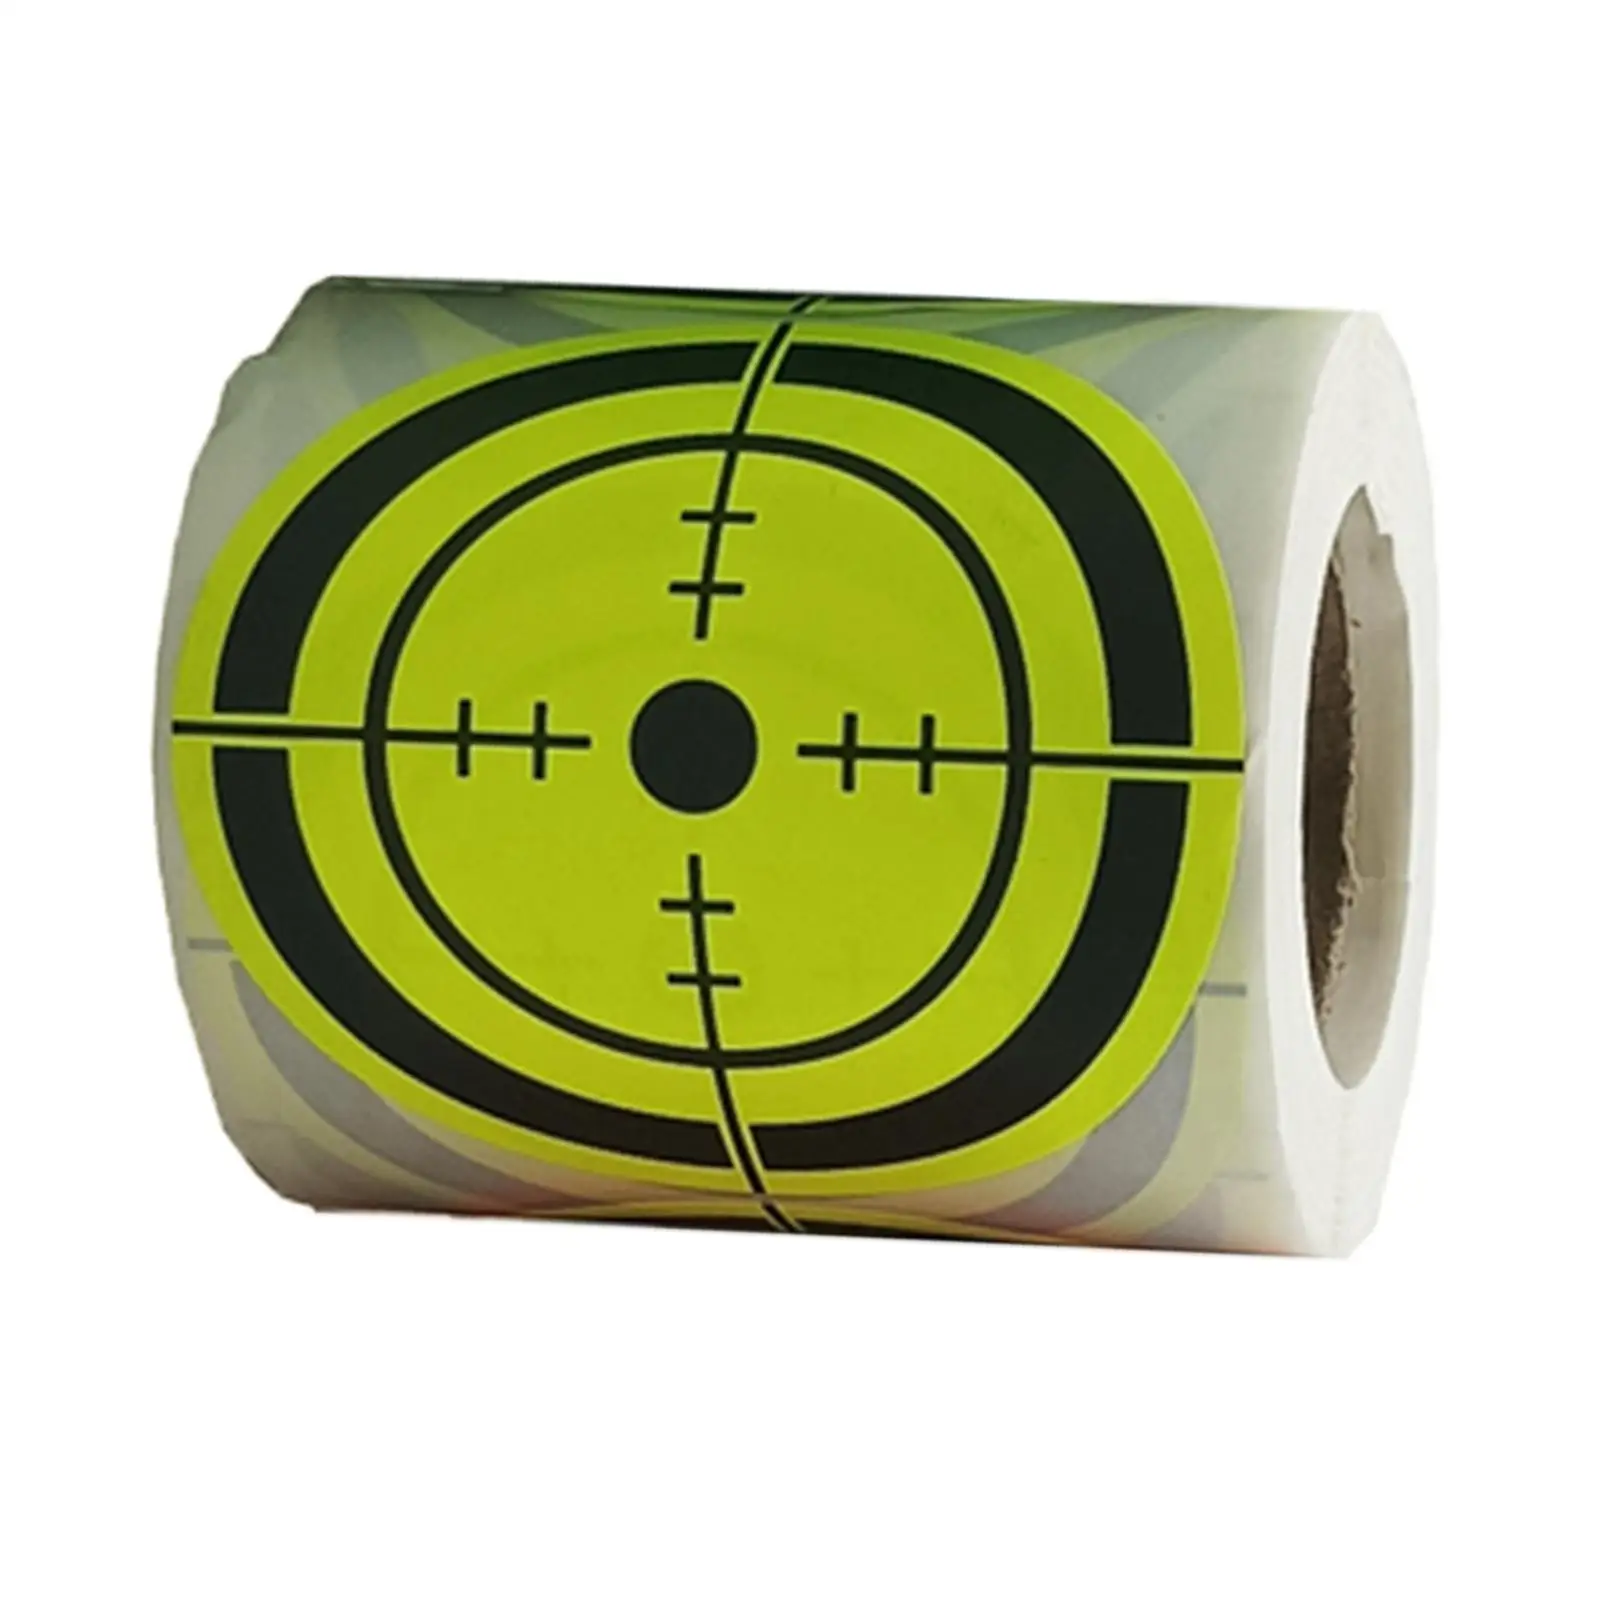 Round Hunting Accessories Range Paster Self